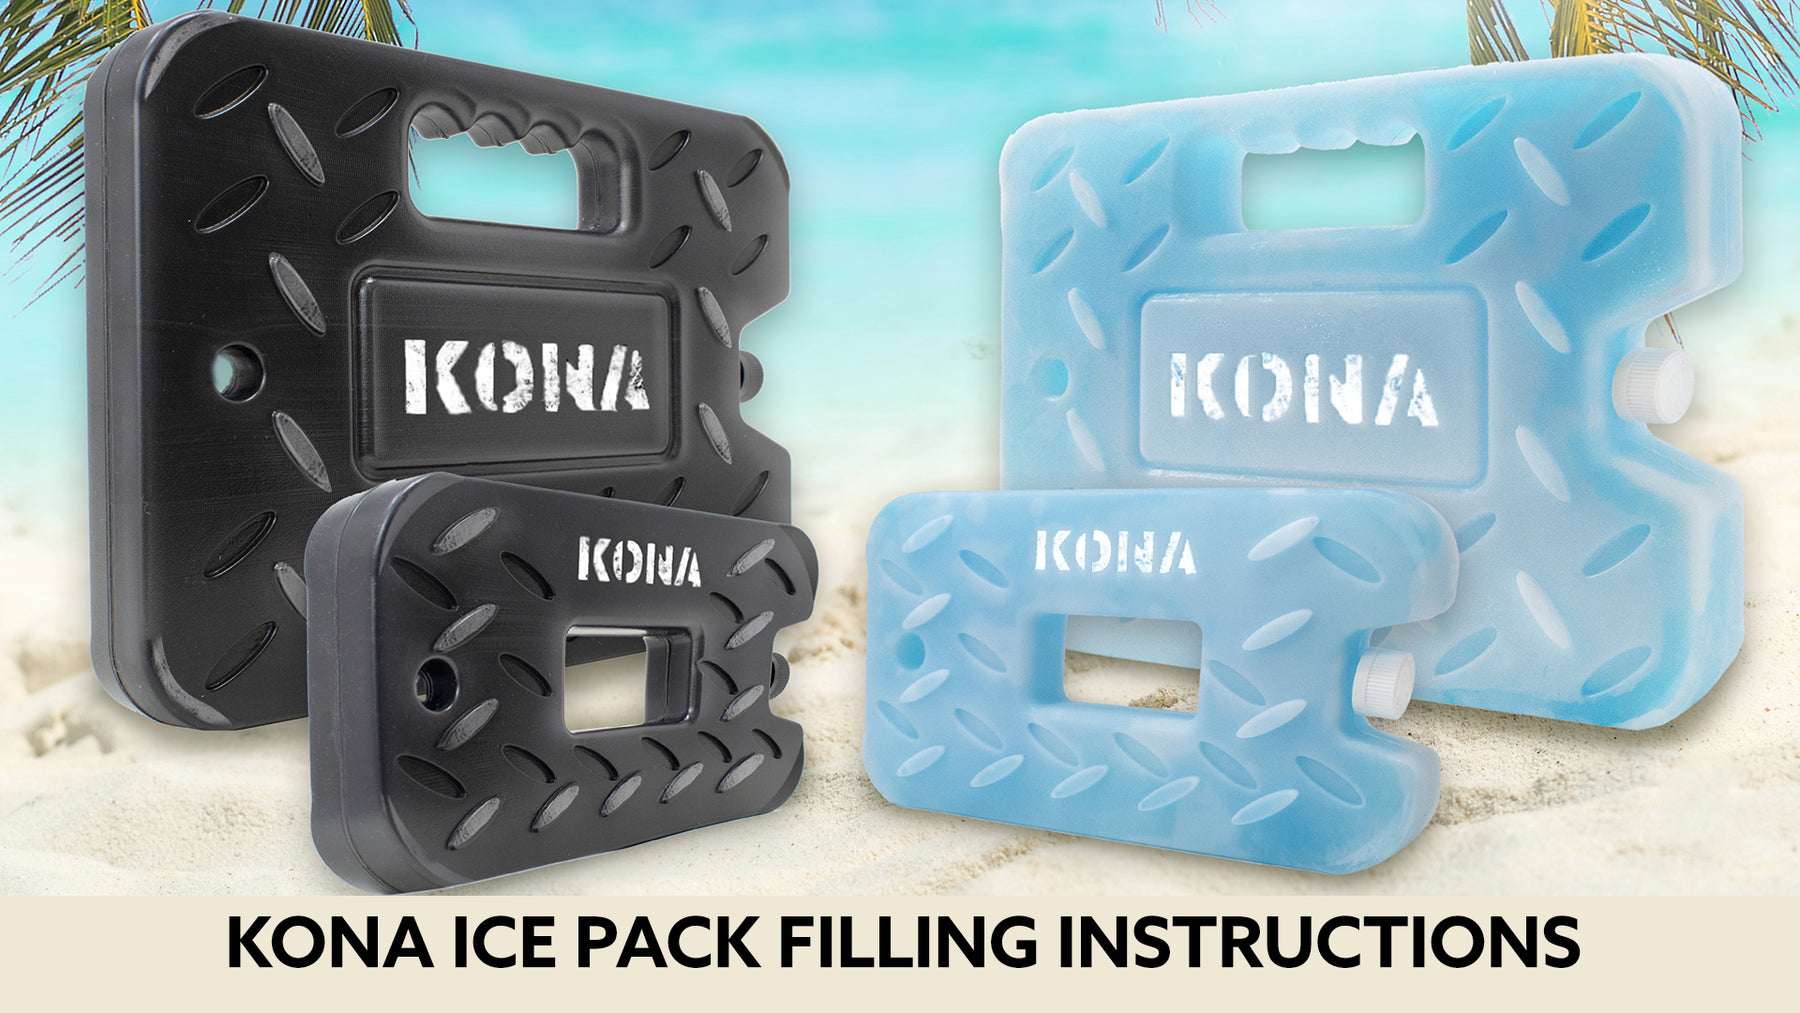 New Kona Extreme Cooler Ice Packs - Features and How To Use & Fill